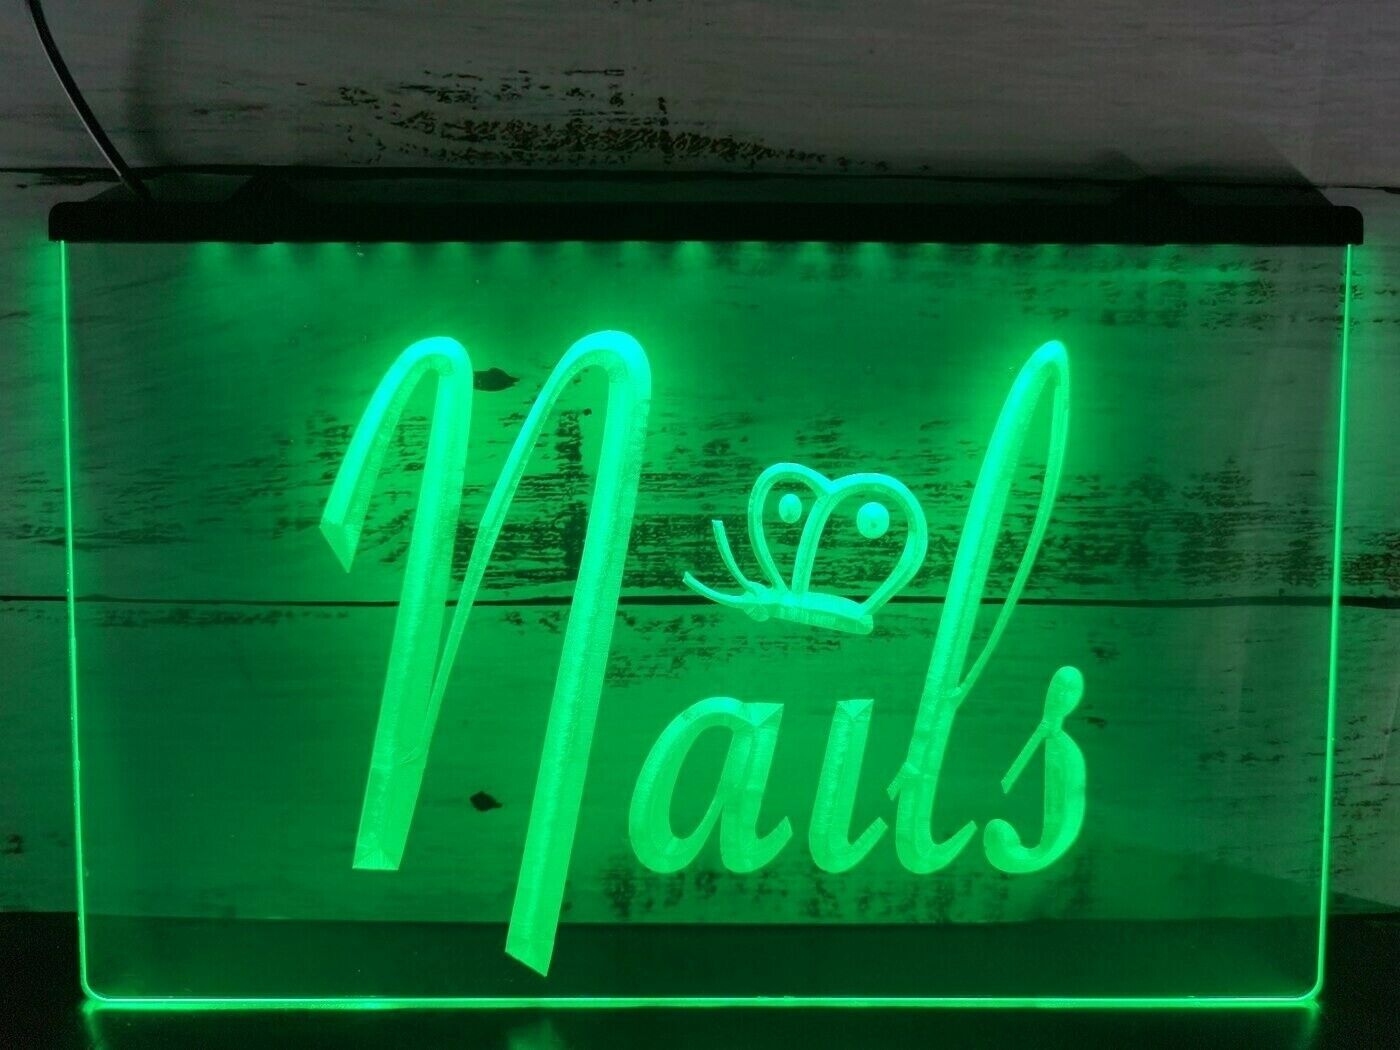 Nails Manicure Pedicure Beauty Salon LED Neon Light Sign Spa Hang Signs Wall Cra